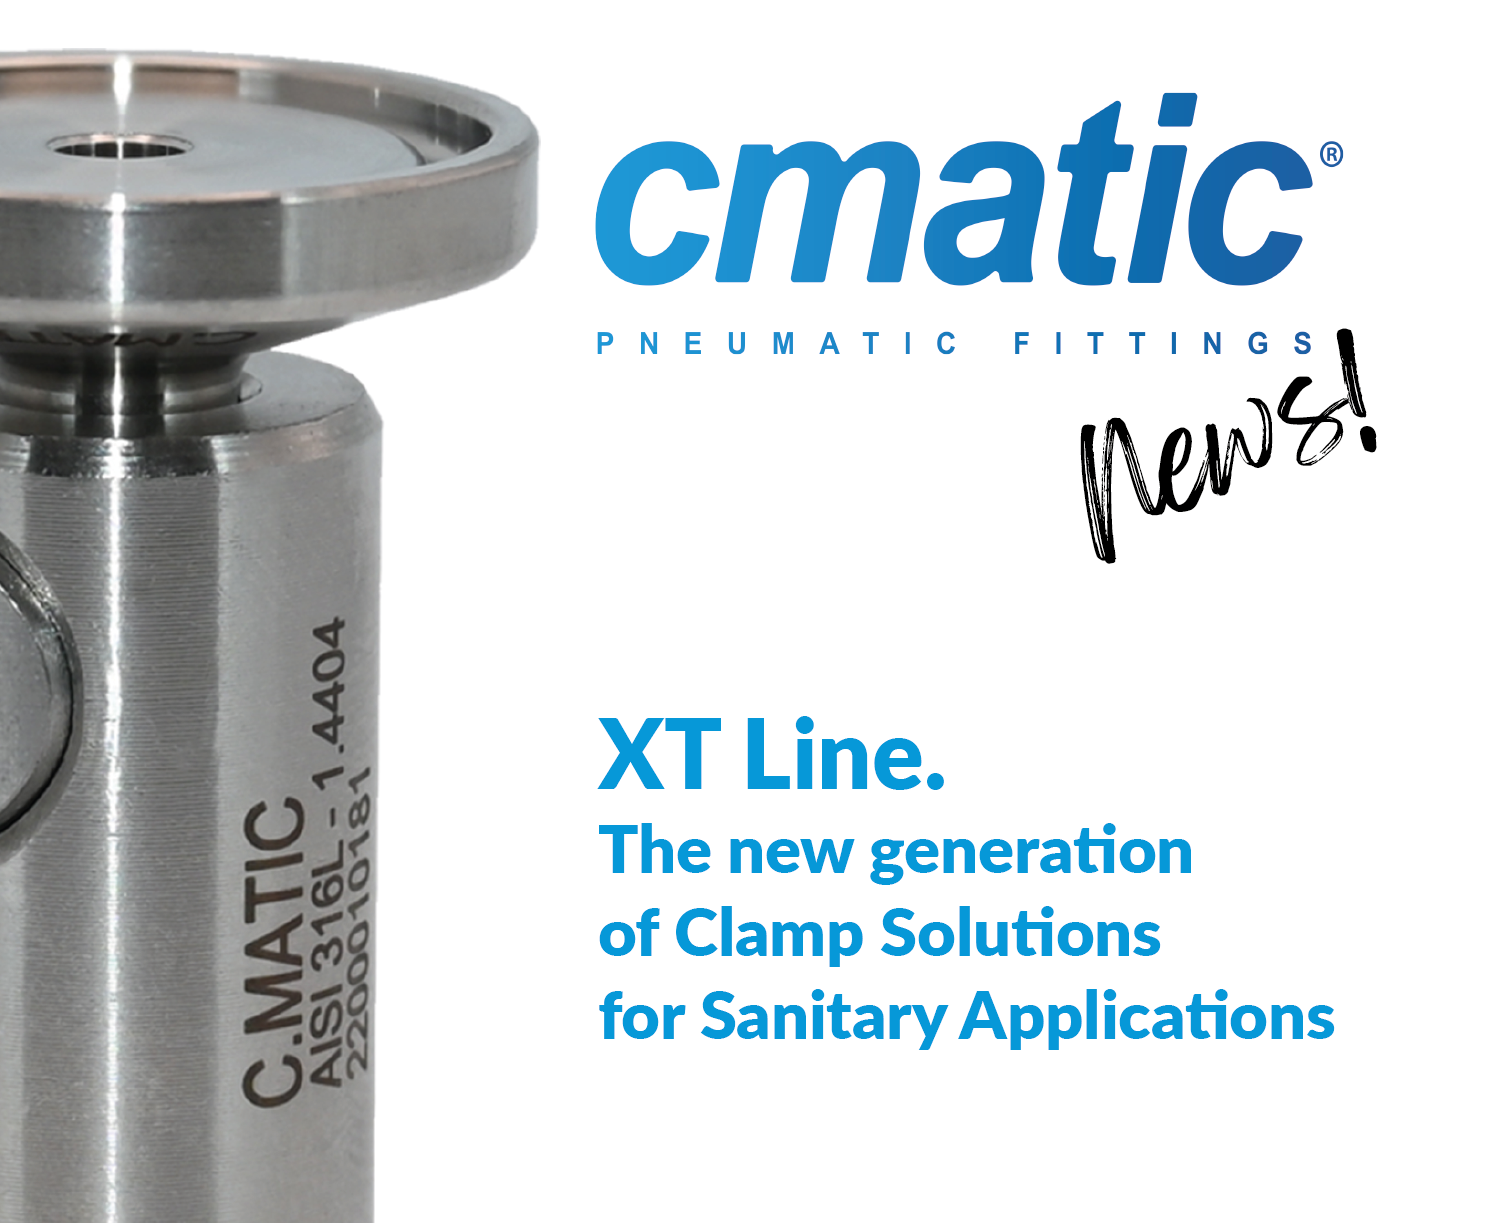 XT Line, Clamp Solutions for Sanitary Applications